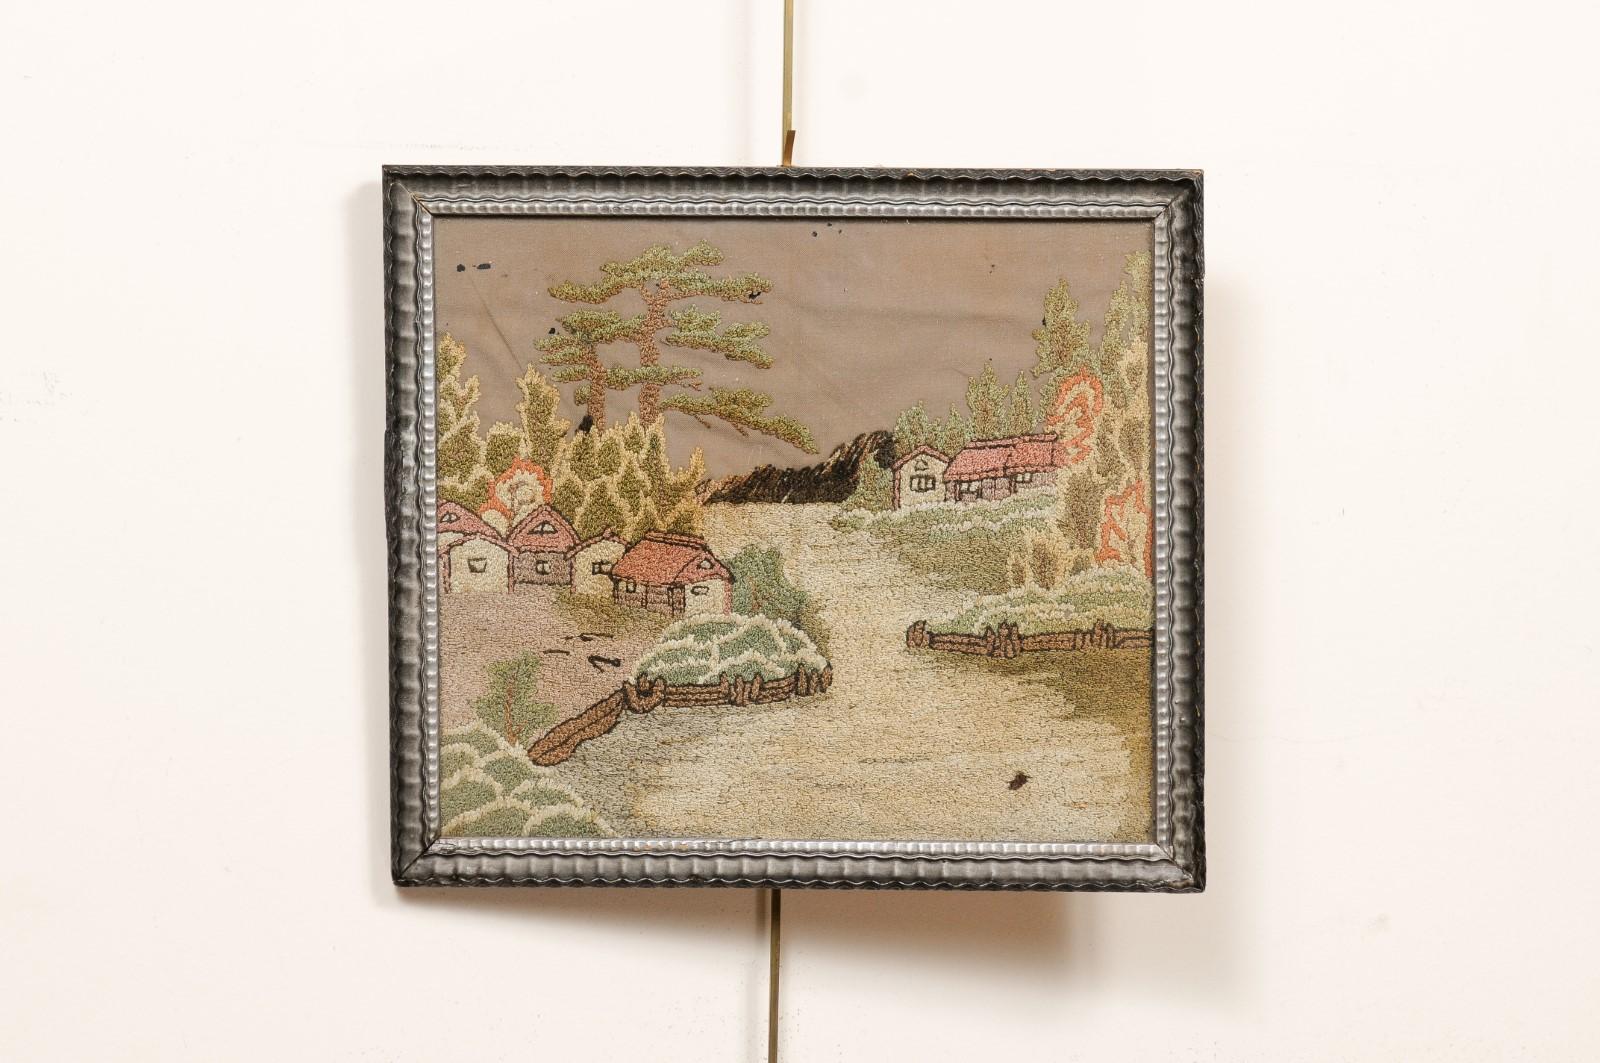 Fabric  Framed 19th Century English Embroidery of a Country Landscape For Sale